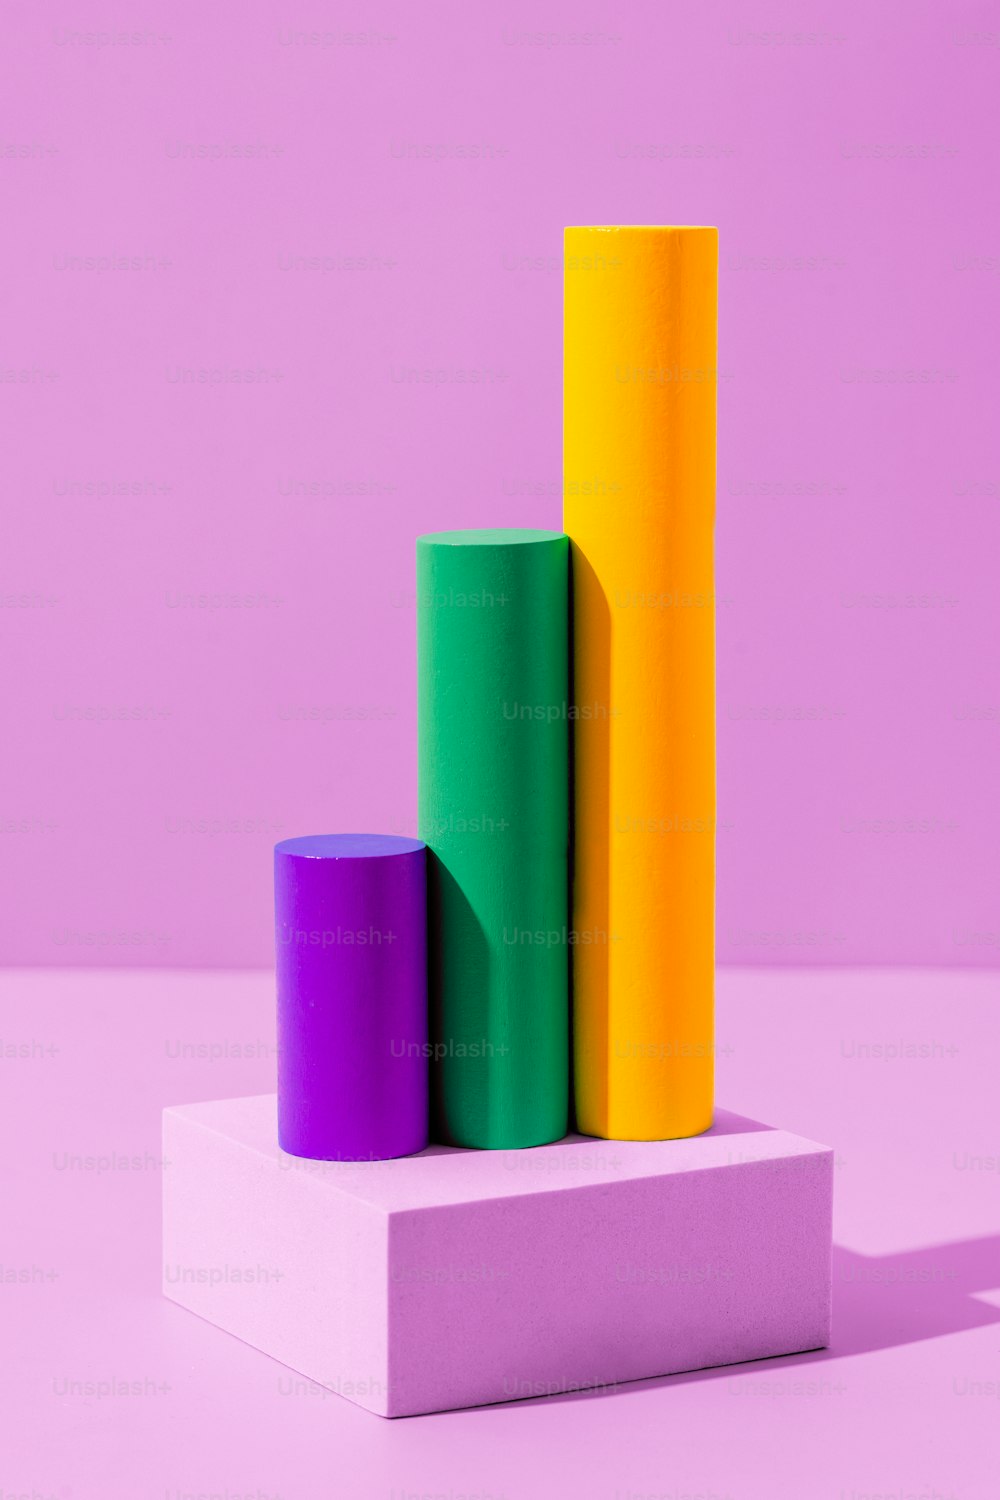 a stack of three different colored cylinders on a pink surface